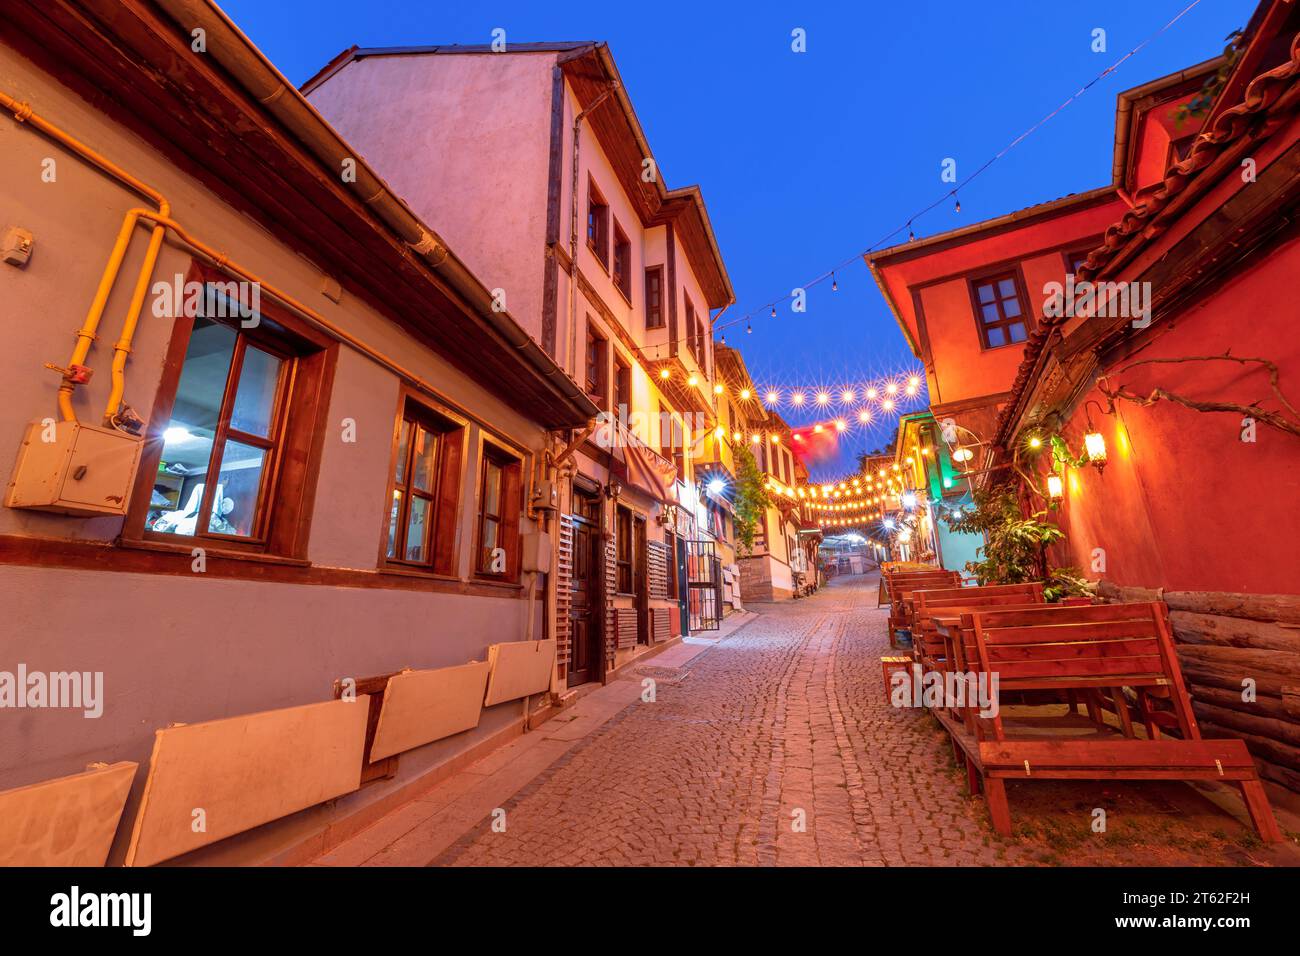 night view of Eskisehir city unveils its diverse neighborhoods, connected by crisscrossing streets. Architectural wonders of historic Odunpazari Stock Photo